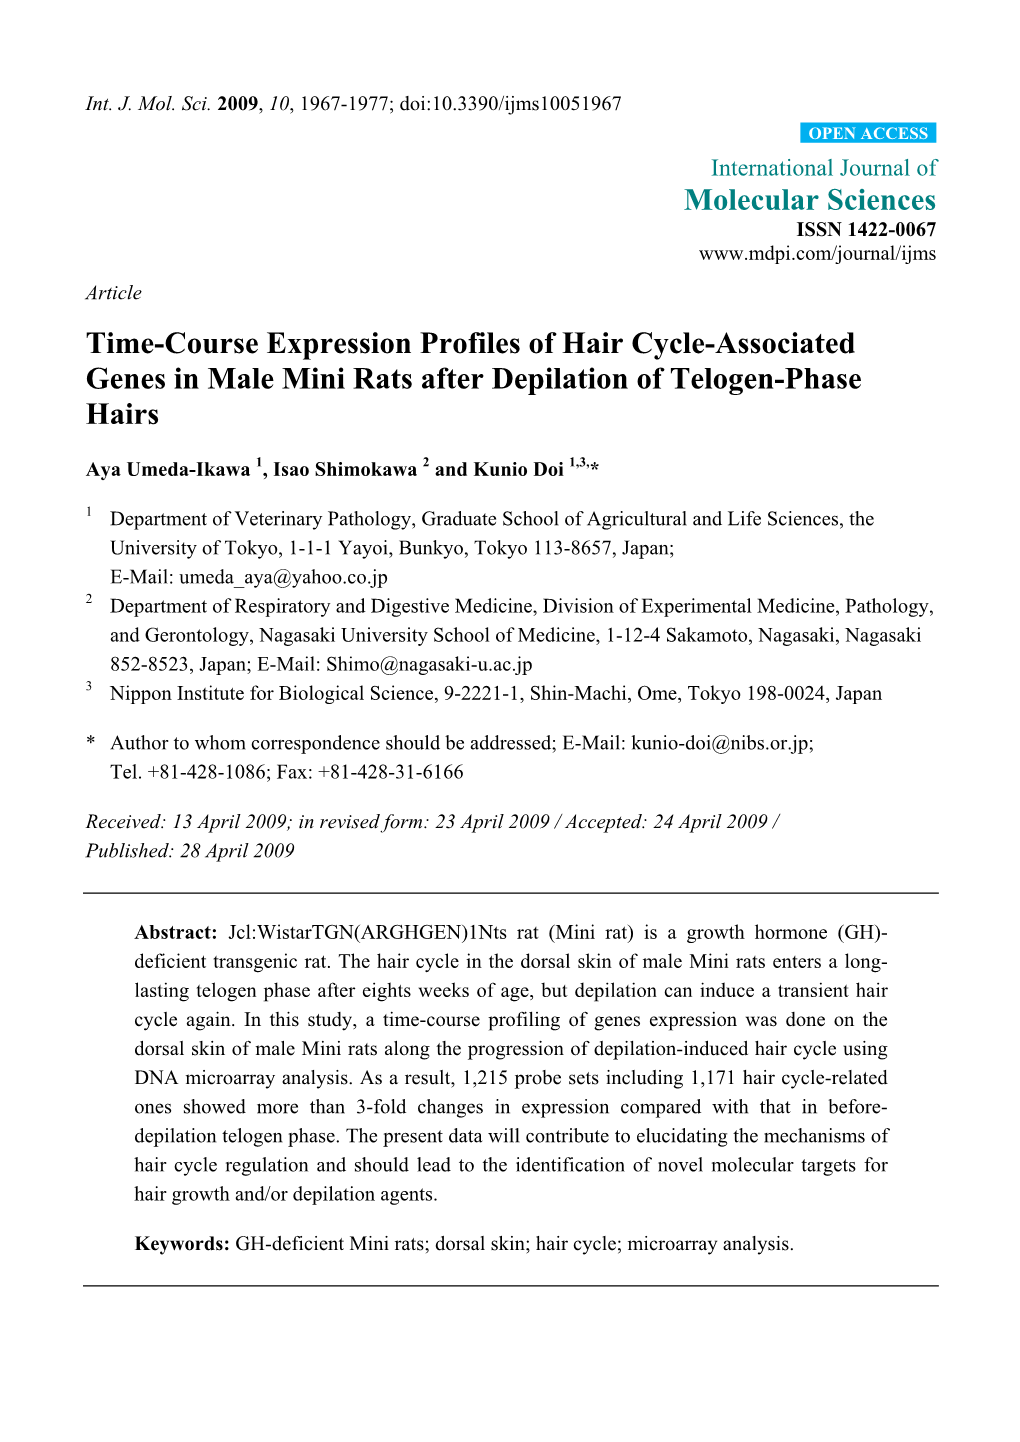 Time-Course Expression Profiles of Hair Cycle-Associated Genes in Male Mini Rats After Depilation of Telogen-Phase Hairs